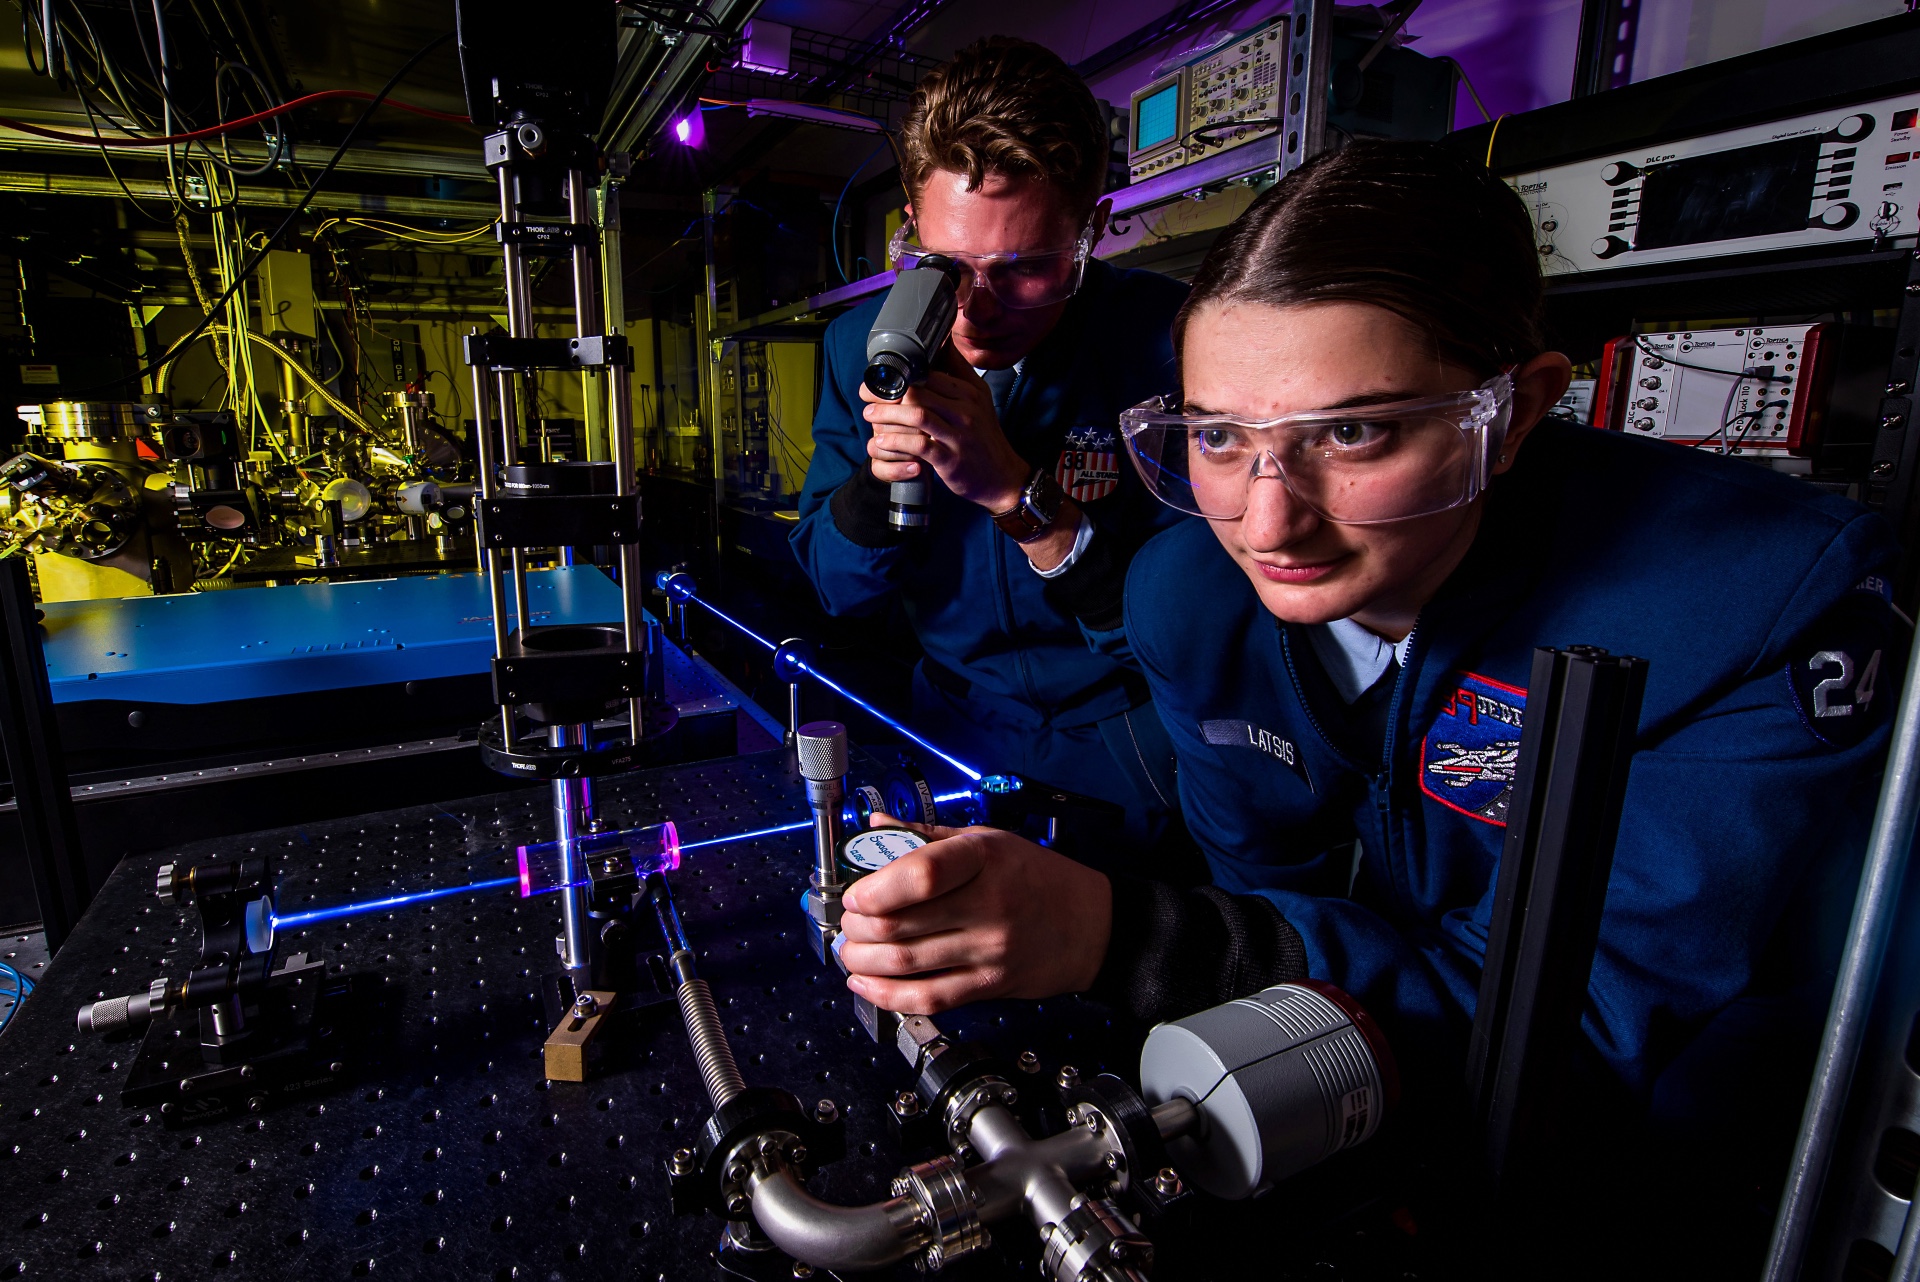 Cadets Elizabeth Latsis and John Caldwell perform research using lasers in the U.S. Air Force Academy's Laser and Optics Research Center, Nov. 4, 2021.